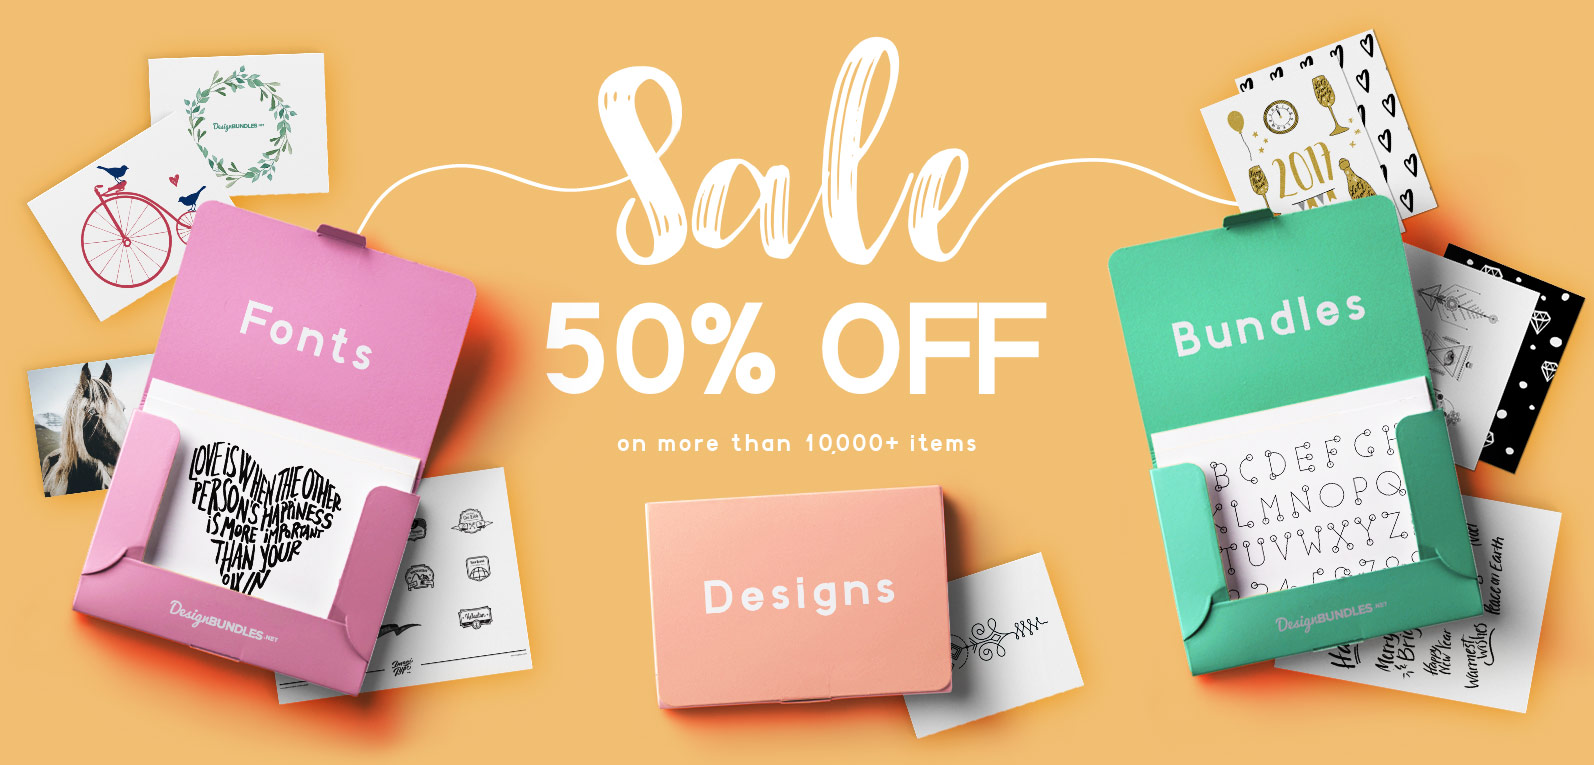 Black Friday Sale Save 50% on Graphics Templates